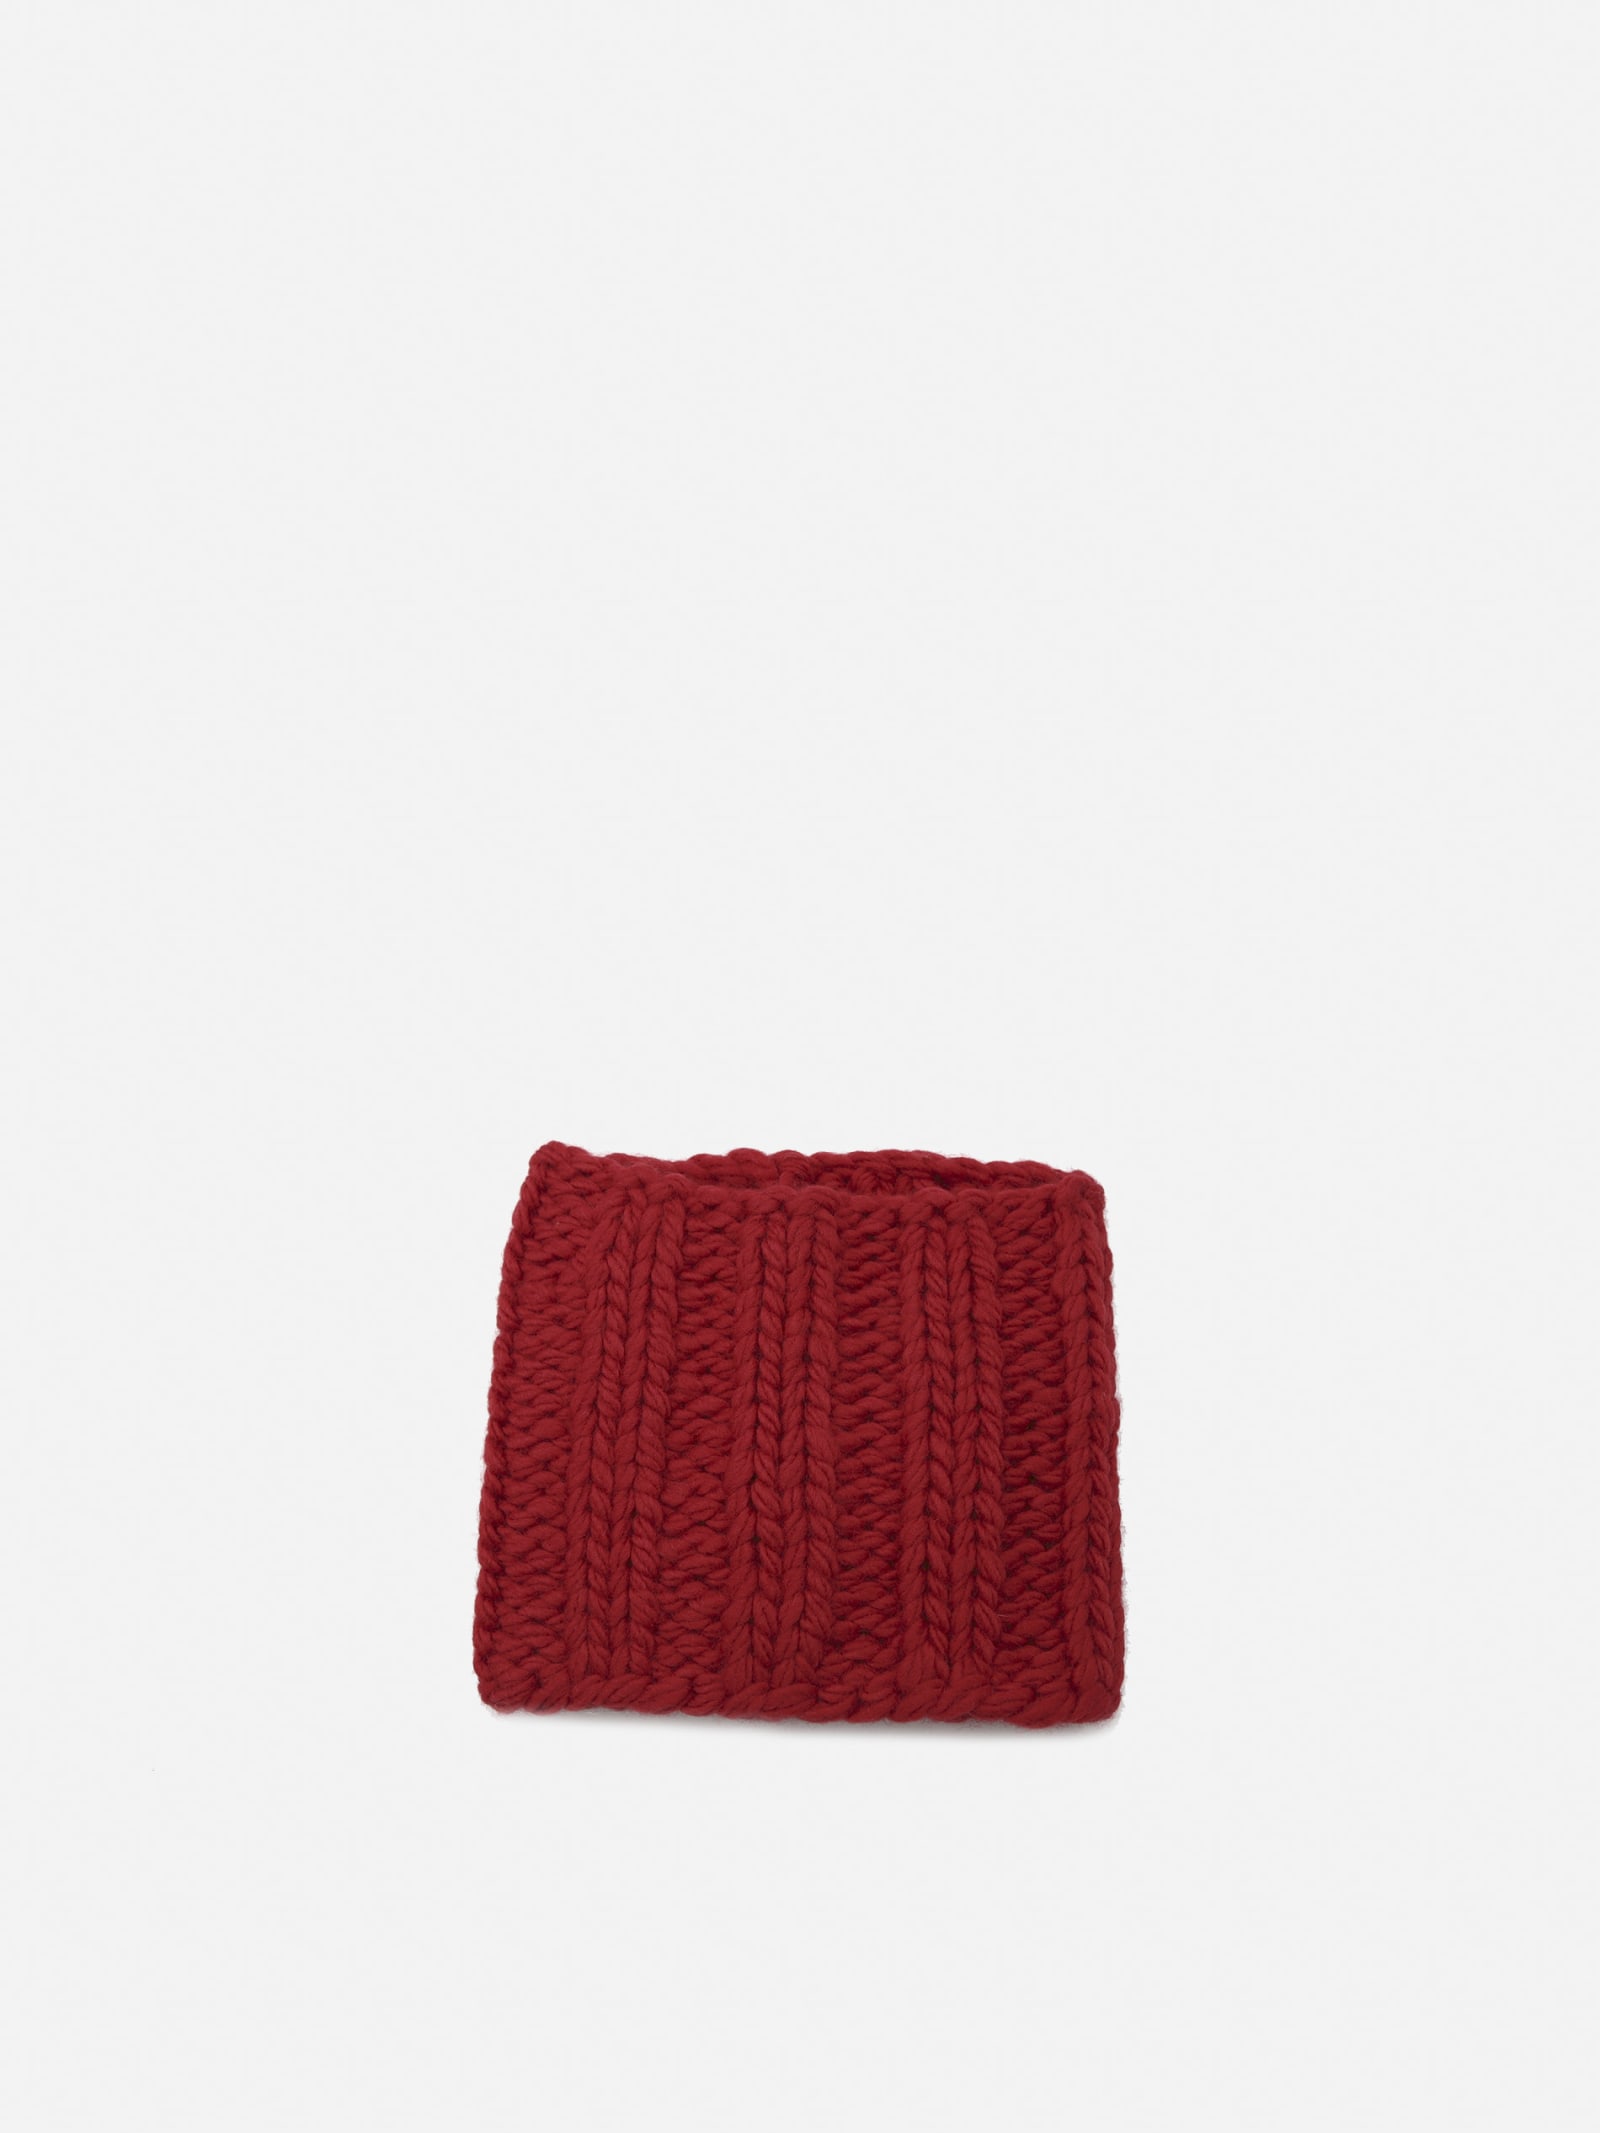 J.W. Anderson Red Knit Neck Warmer